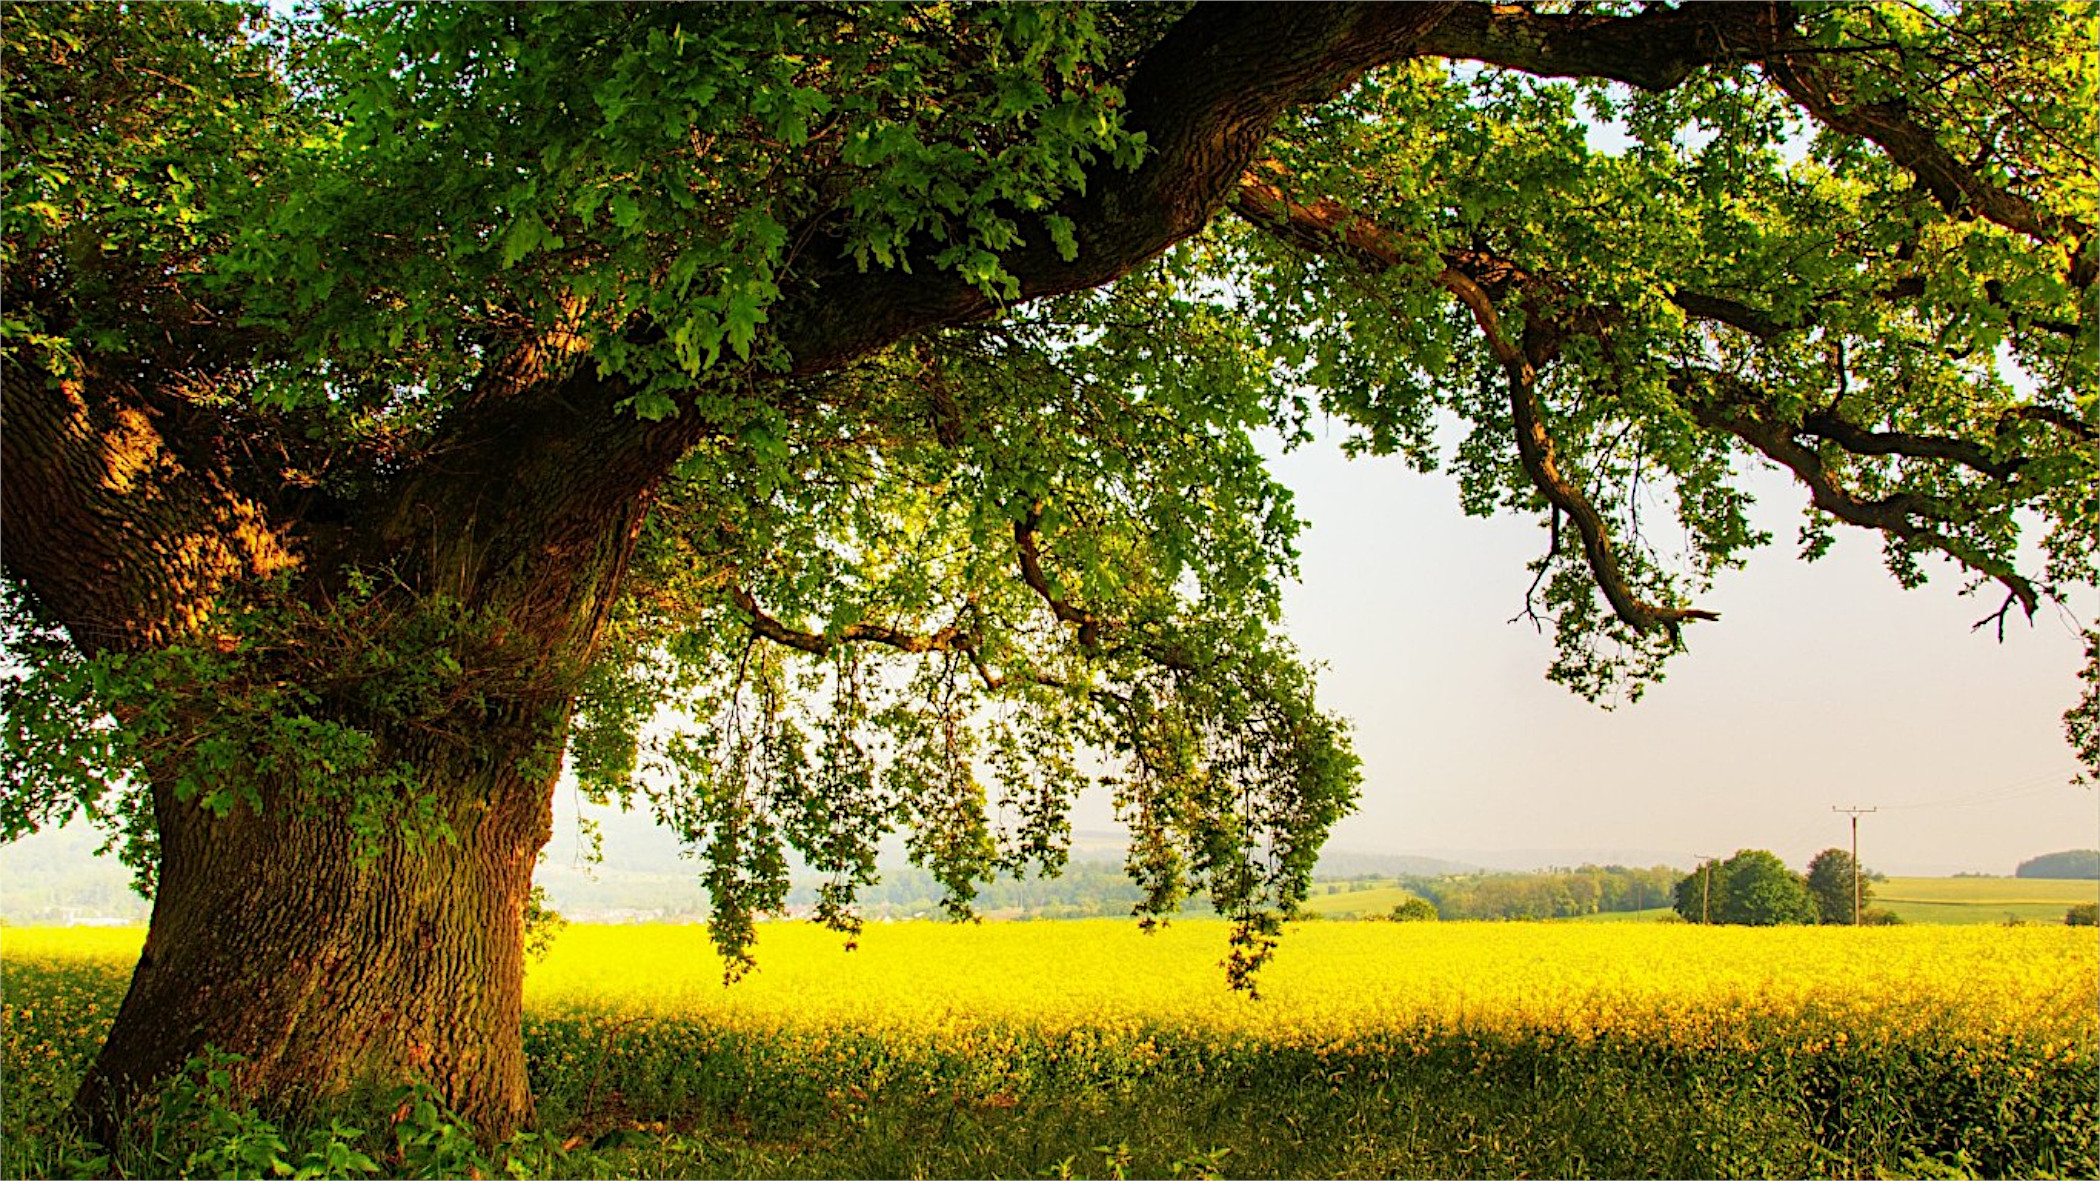 Free photo A big old oak tree in a field with yellow flowers